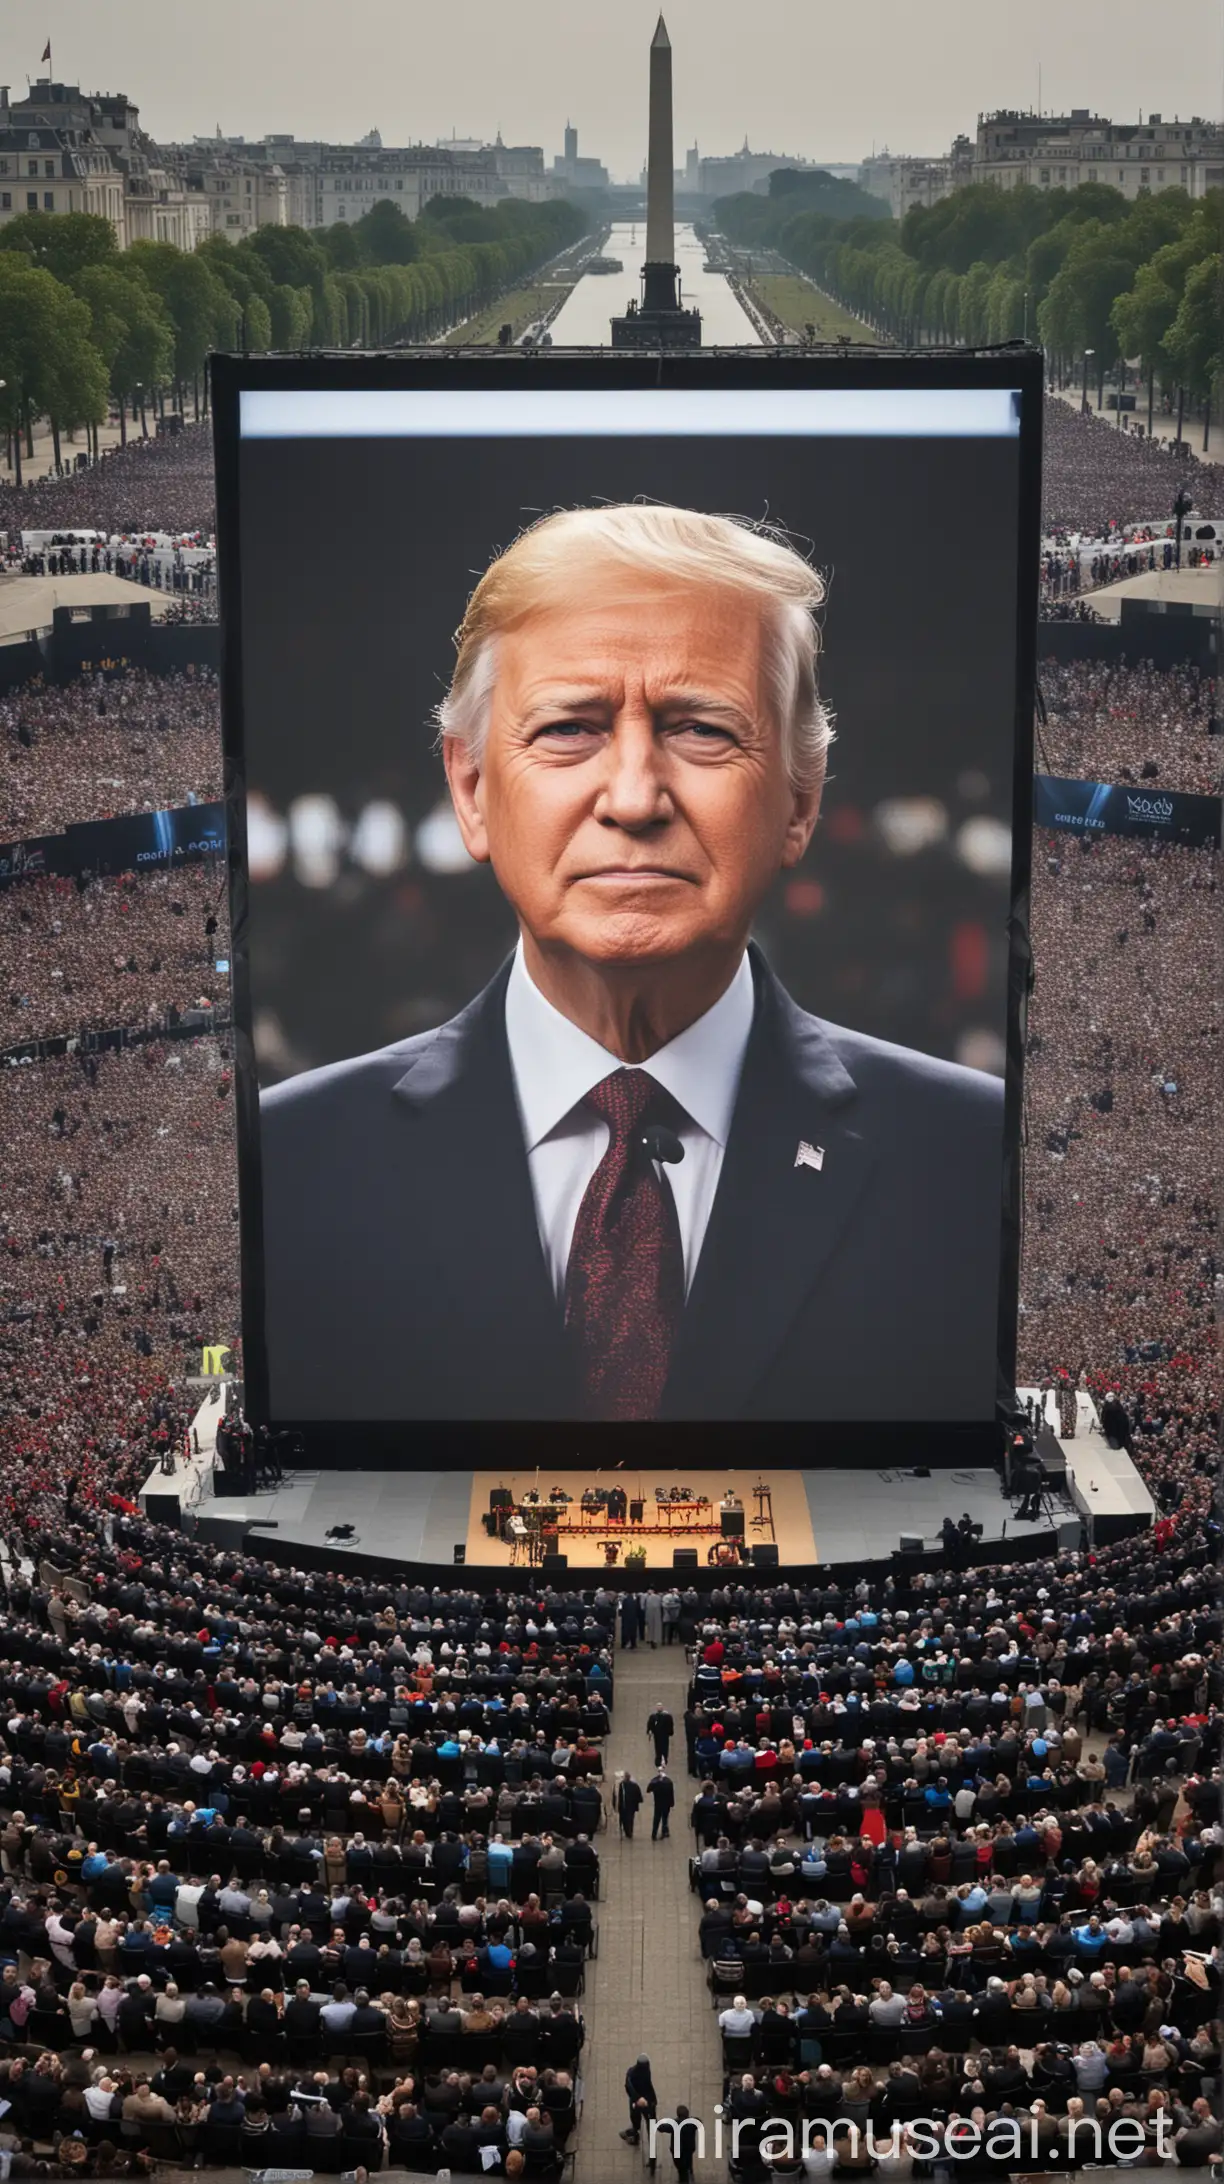 A grand (((opening ceremony))) featuring a world president delivering a stirring address on a giant LED screen, with a massive audience gathered around, all eyes fixed intently on the historic moment